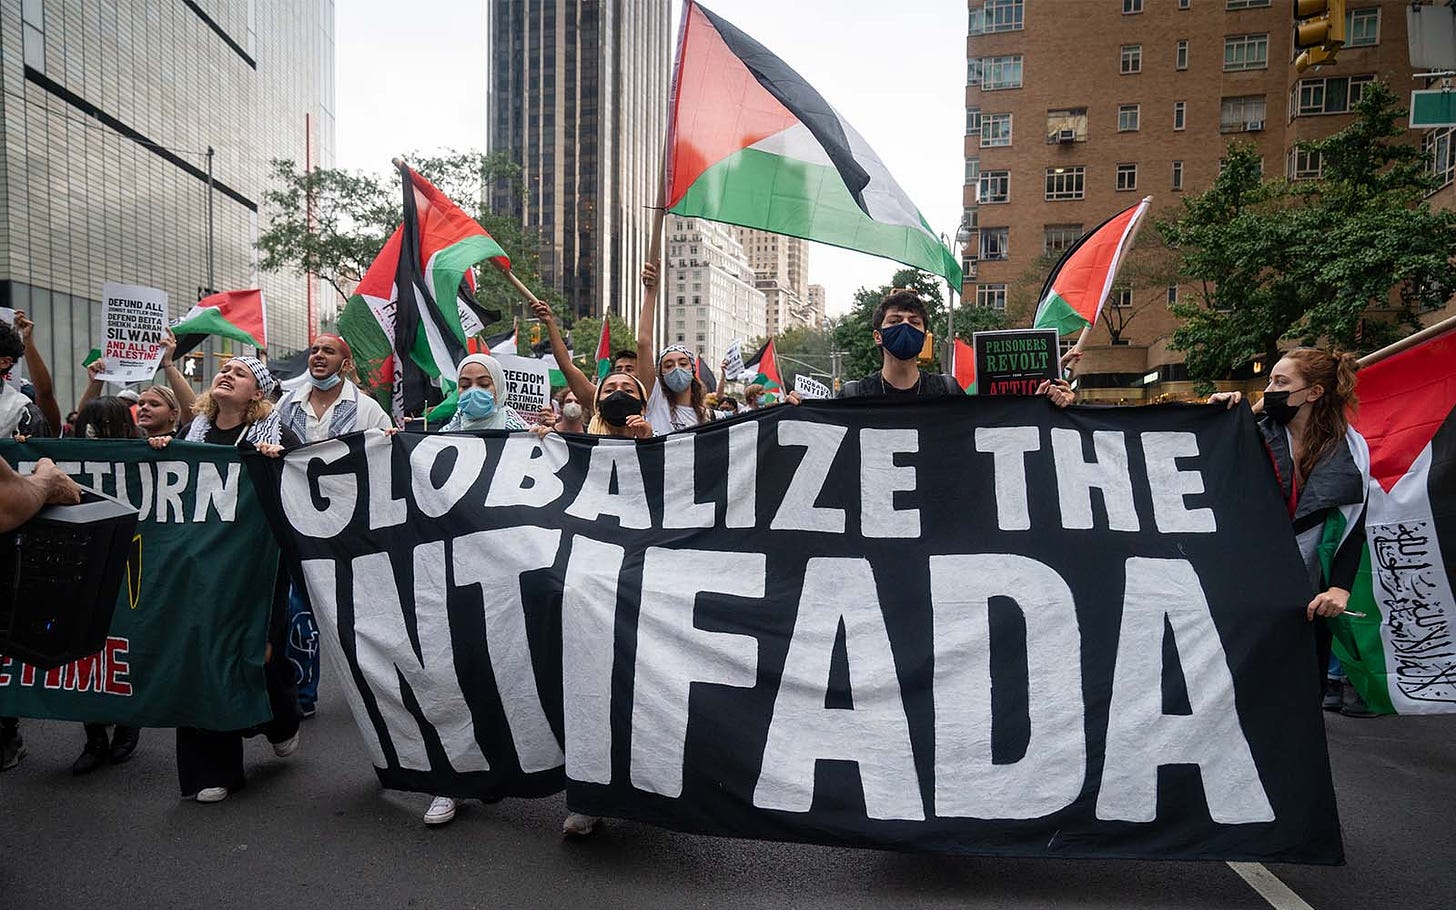 US pro-Palestinian groups applaud Hamas terror onslaught, plan support  rallies | The Times of Israel